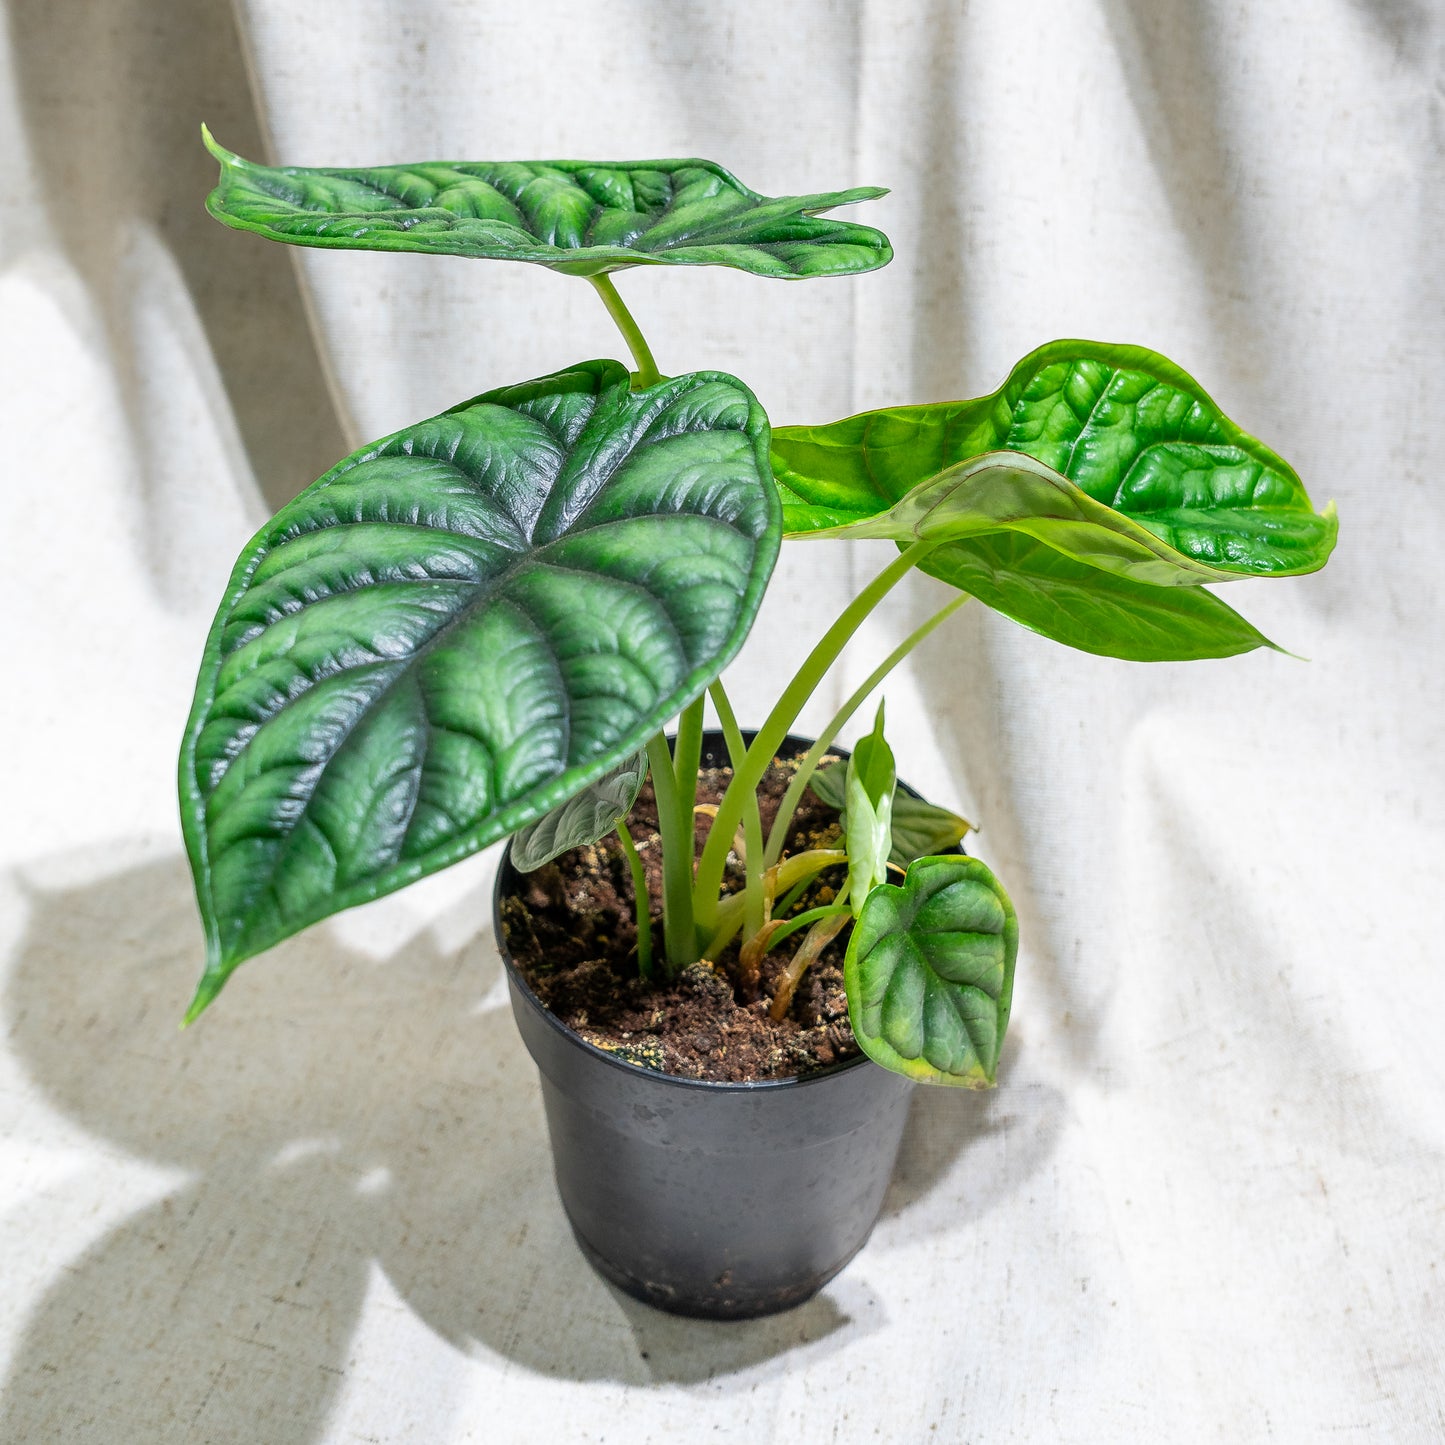 Elephant Ear, Dragon Scale Alocasia (Alocasia reginula) in a 5 inch pot. Indoor plant for sale by Promise Supply for delivery and pickup in Toronto